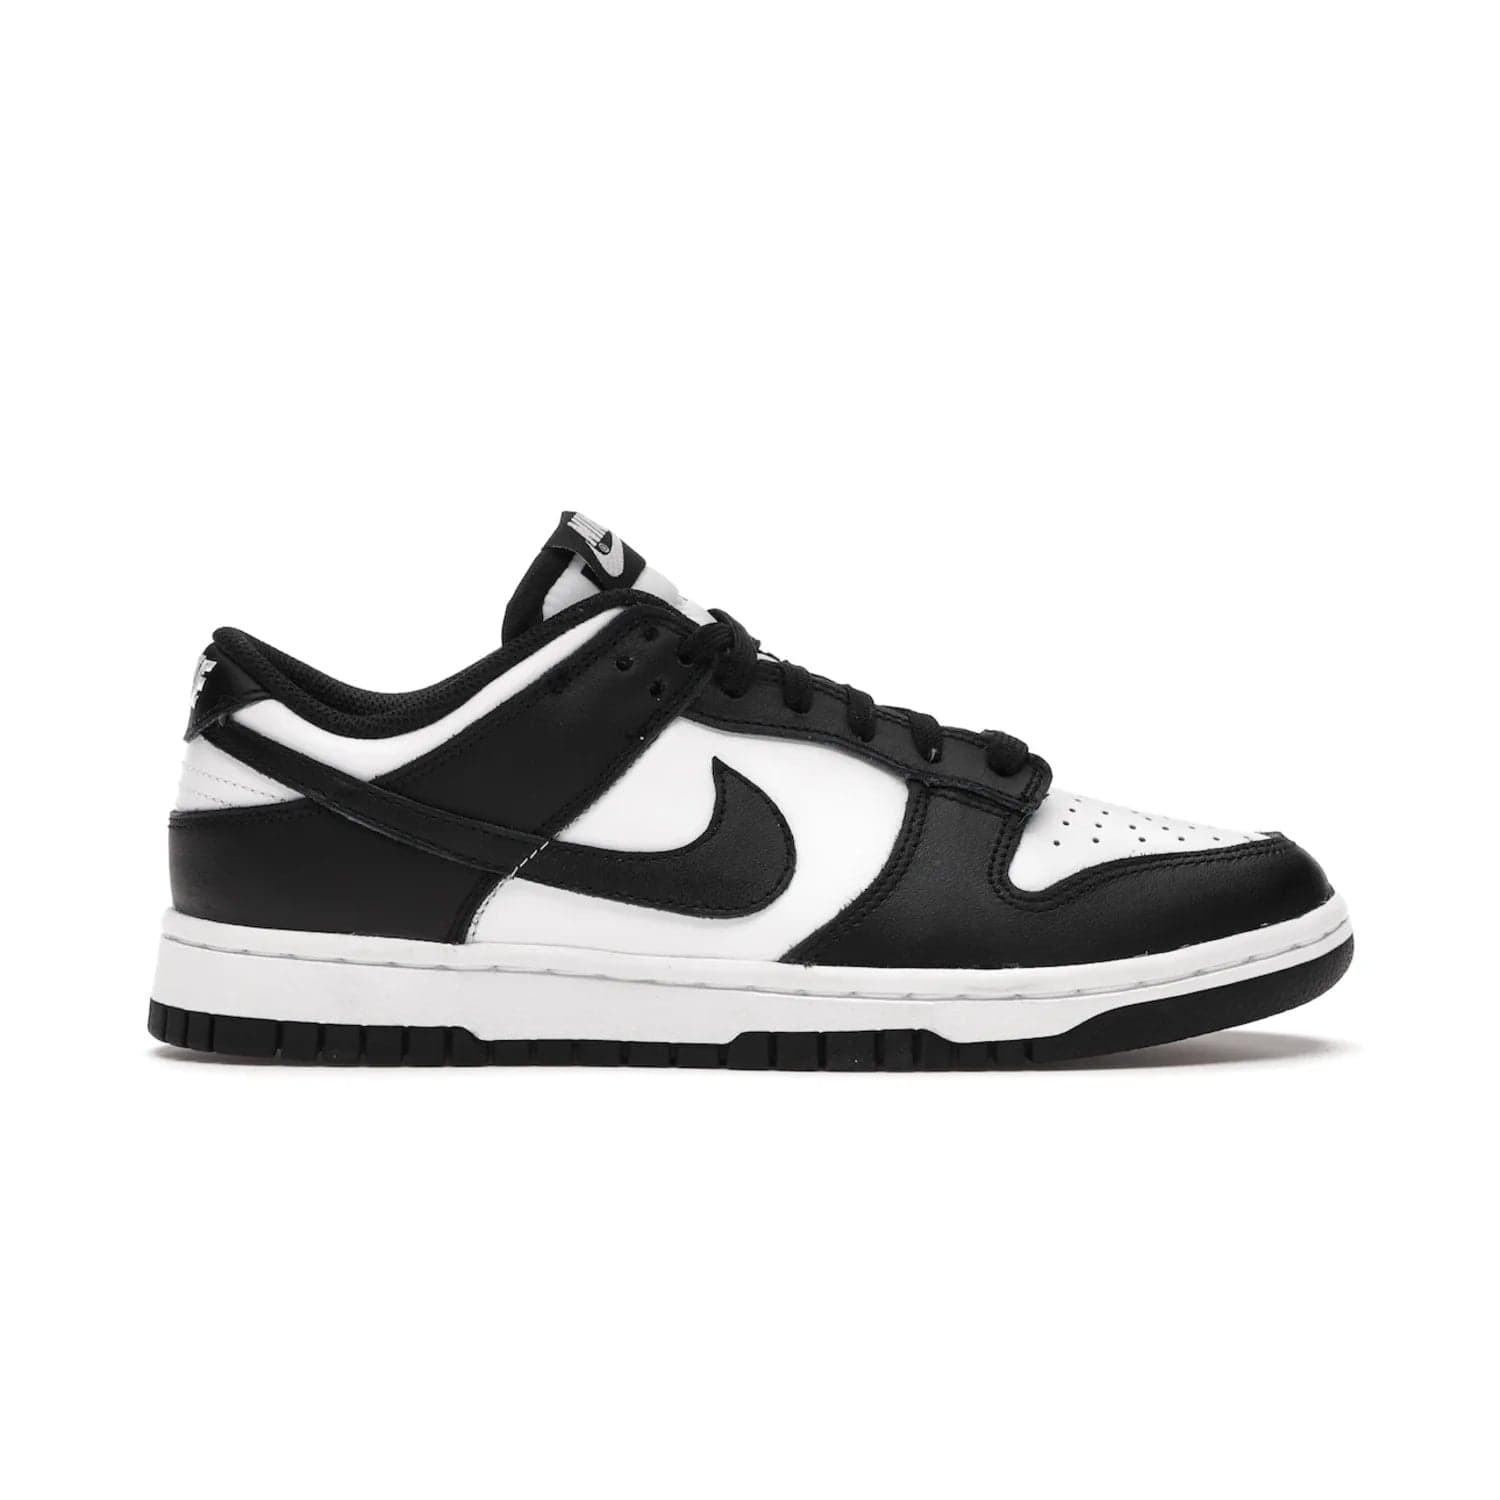 Nike Dunk Low Retro White Black Panda (2021) (Women's) - Image 1 - Only at www.BallersClubKickz.com - Say hello to the new Nike Dunk Low Retro White Black Panda (2021) (Women's)! White & black leather upper with Nike Swoosh logo. Get your pair for $100 in March 2021! Shop now!